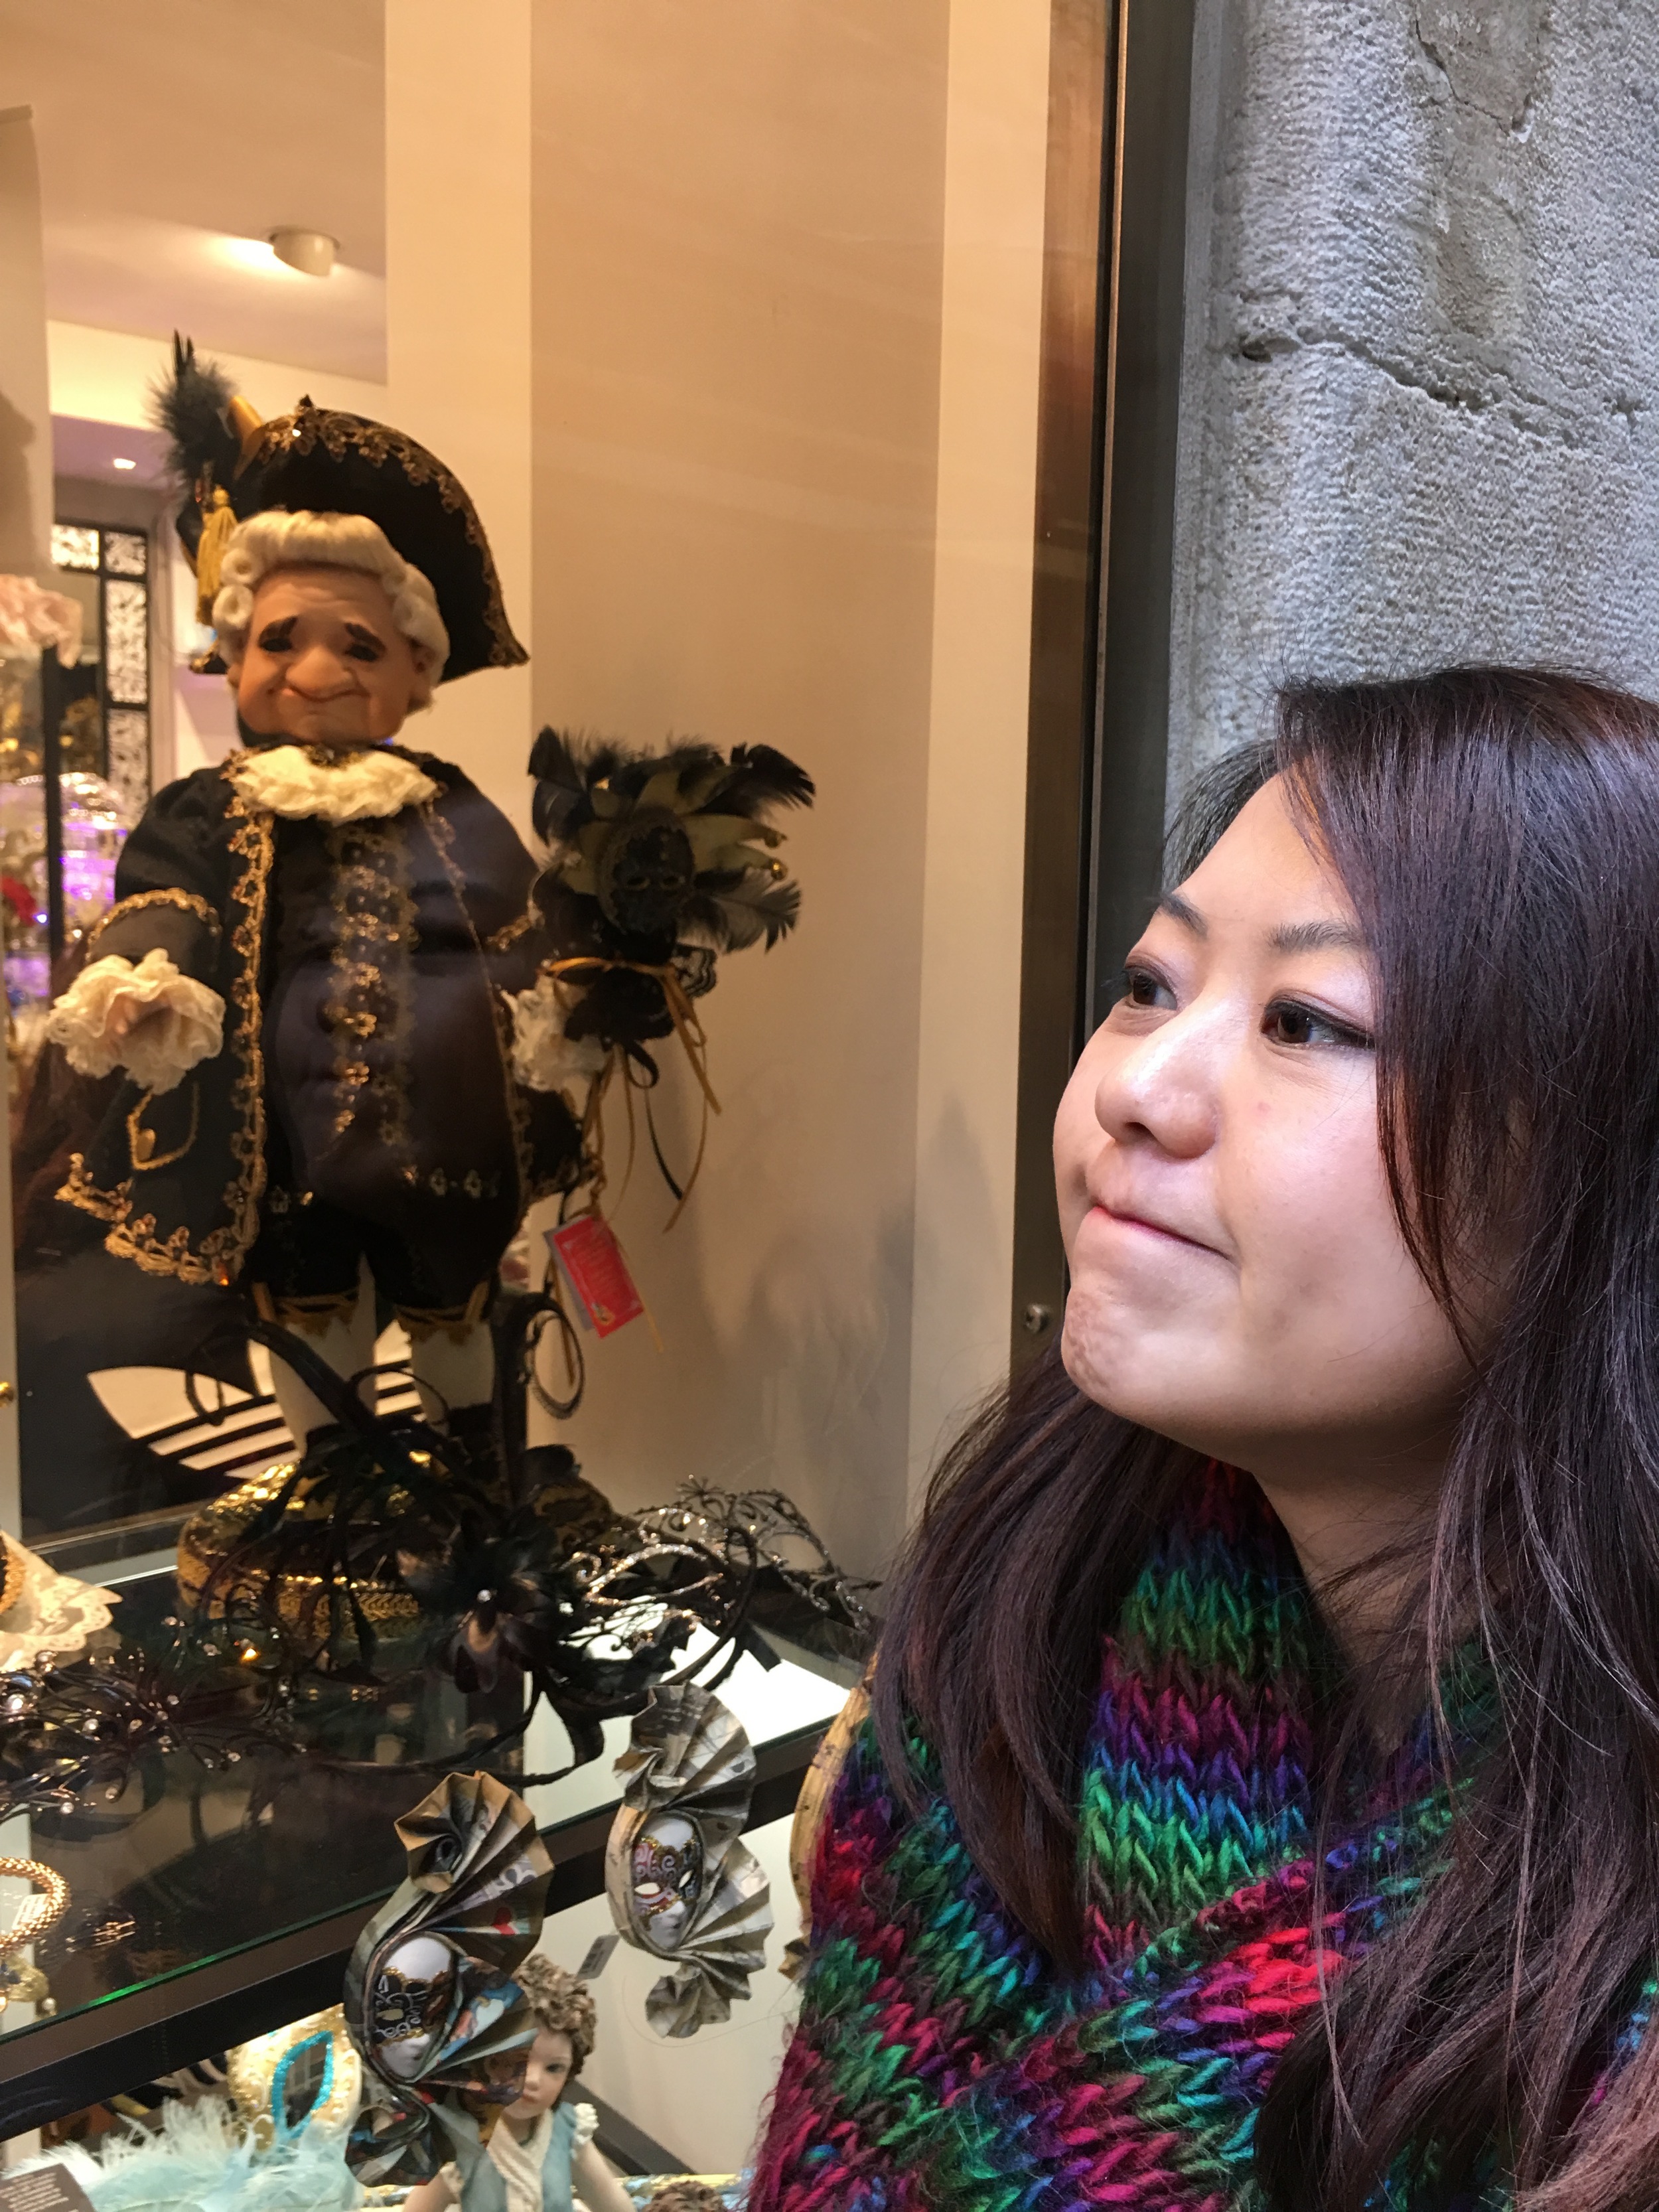 The cutie and the venetian doll